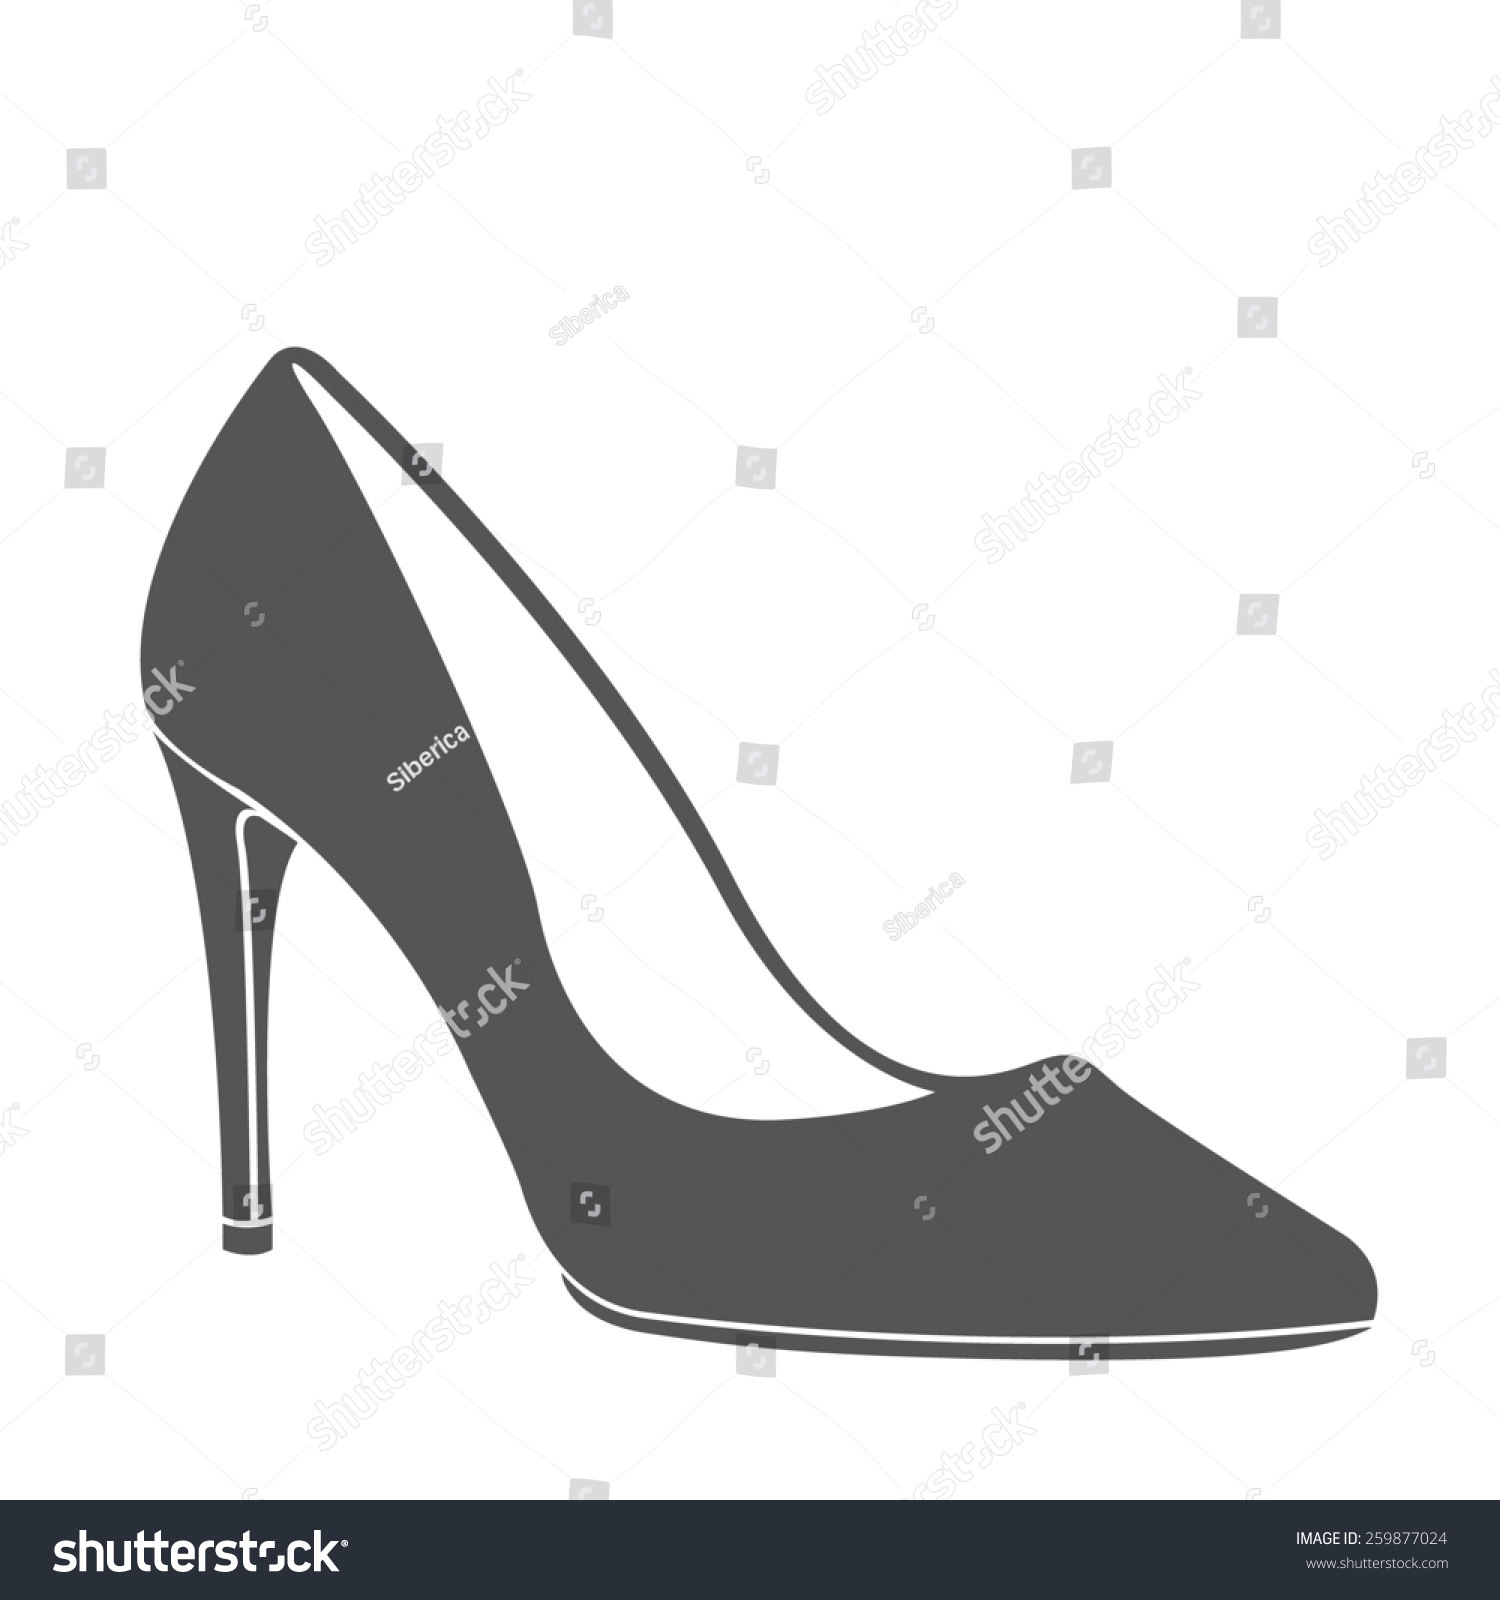 Women High Heel Shoe Design Template Stock Illustration 24 Pertaining To High Heel Template For Cards